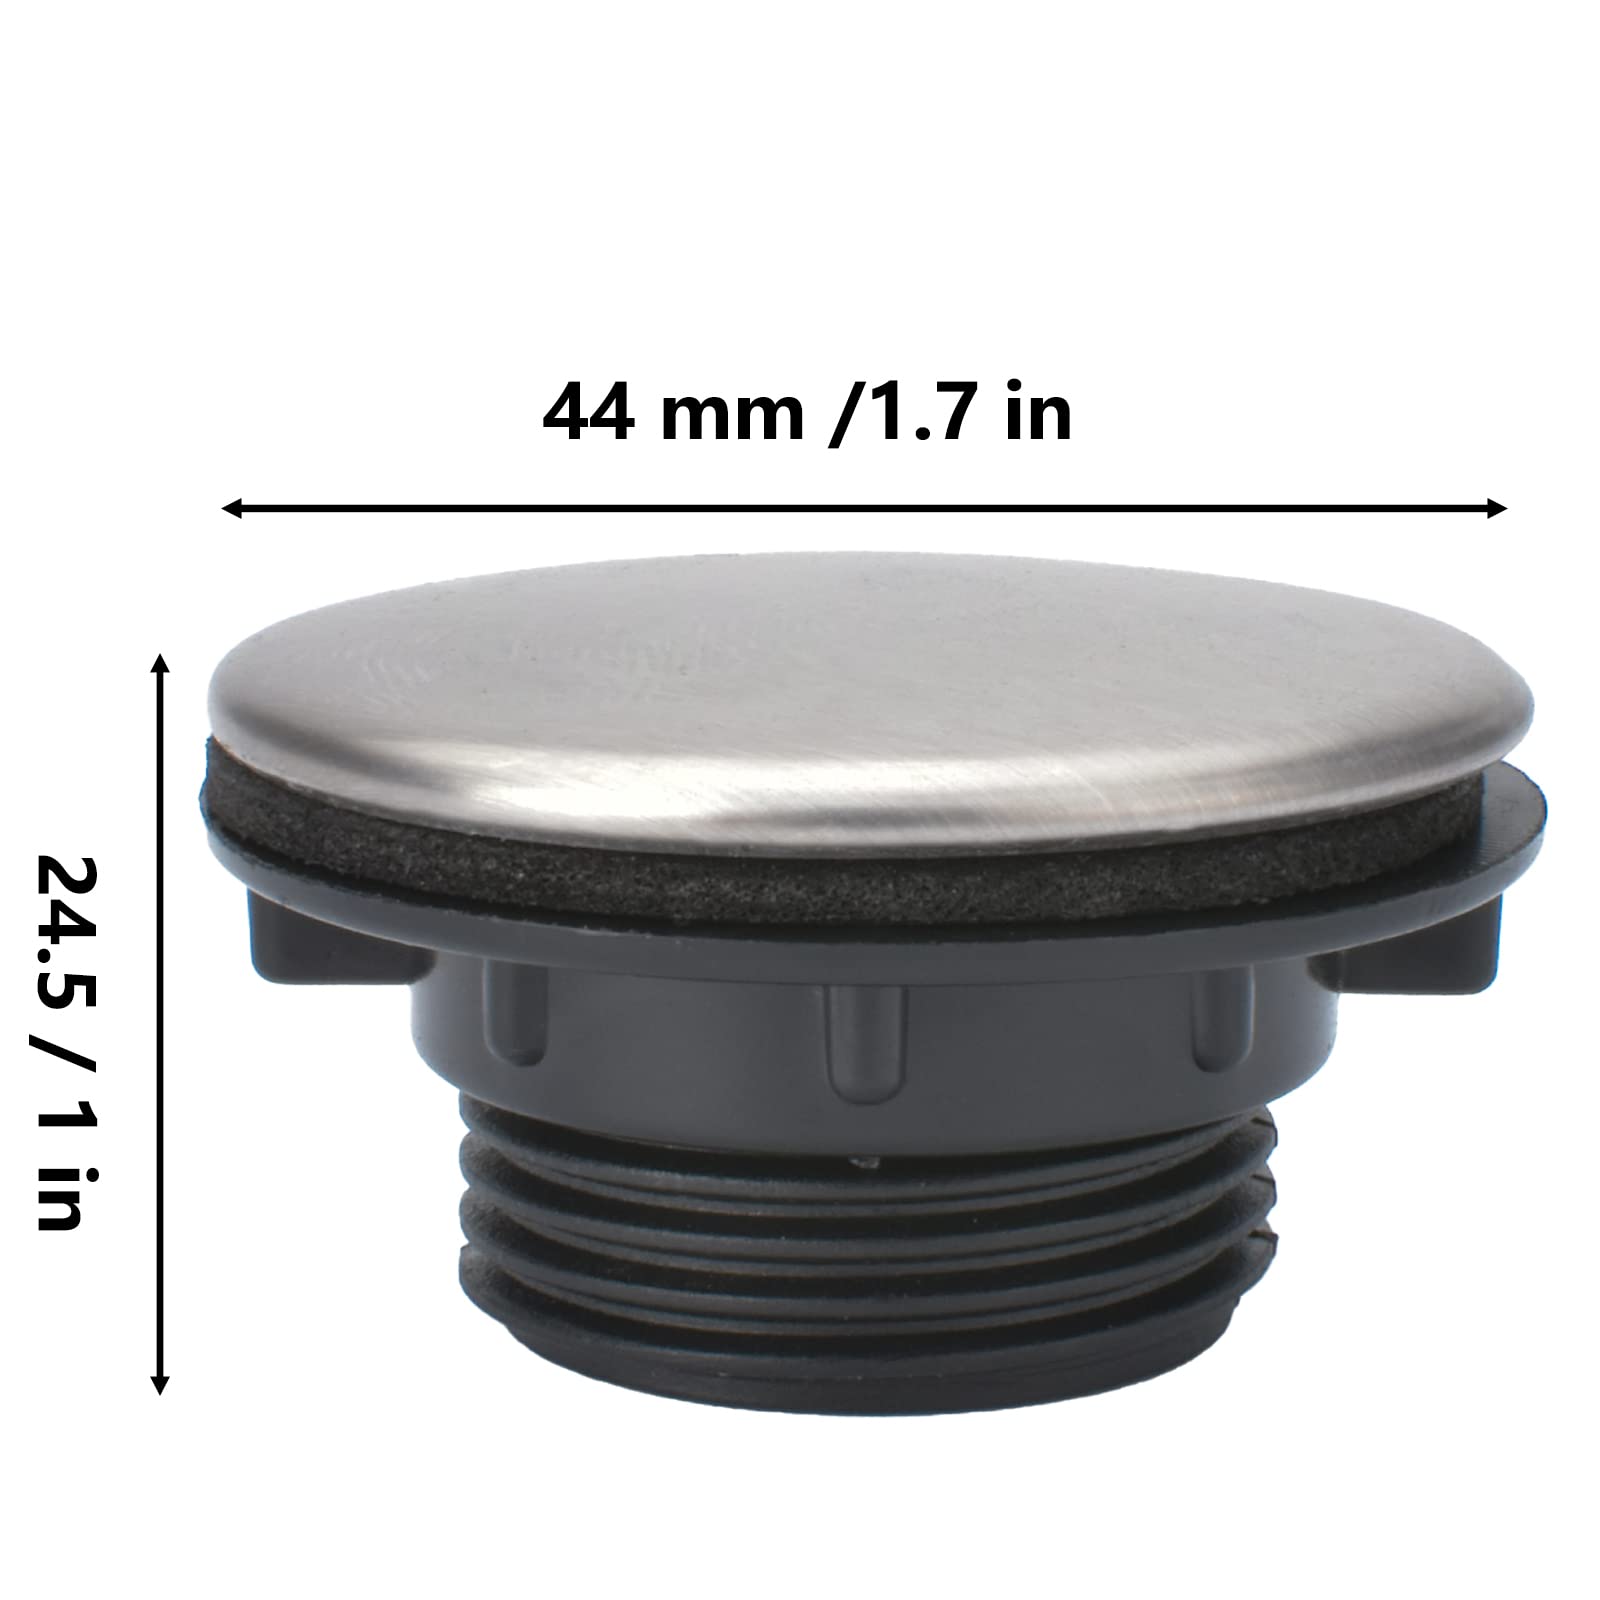 1 Piece Kitchen Sink Hole Cover Stainless Steel Faucet Hole Cover Fit for 1.2 to 1.6 Inch in Diameter Sink Hole